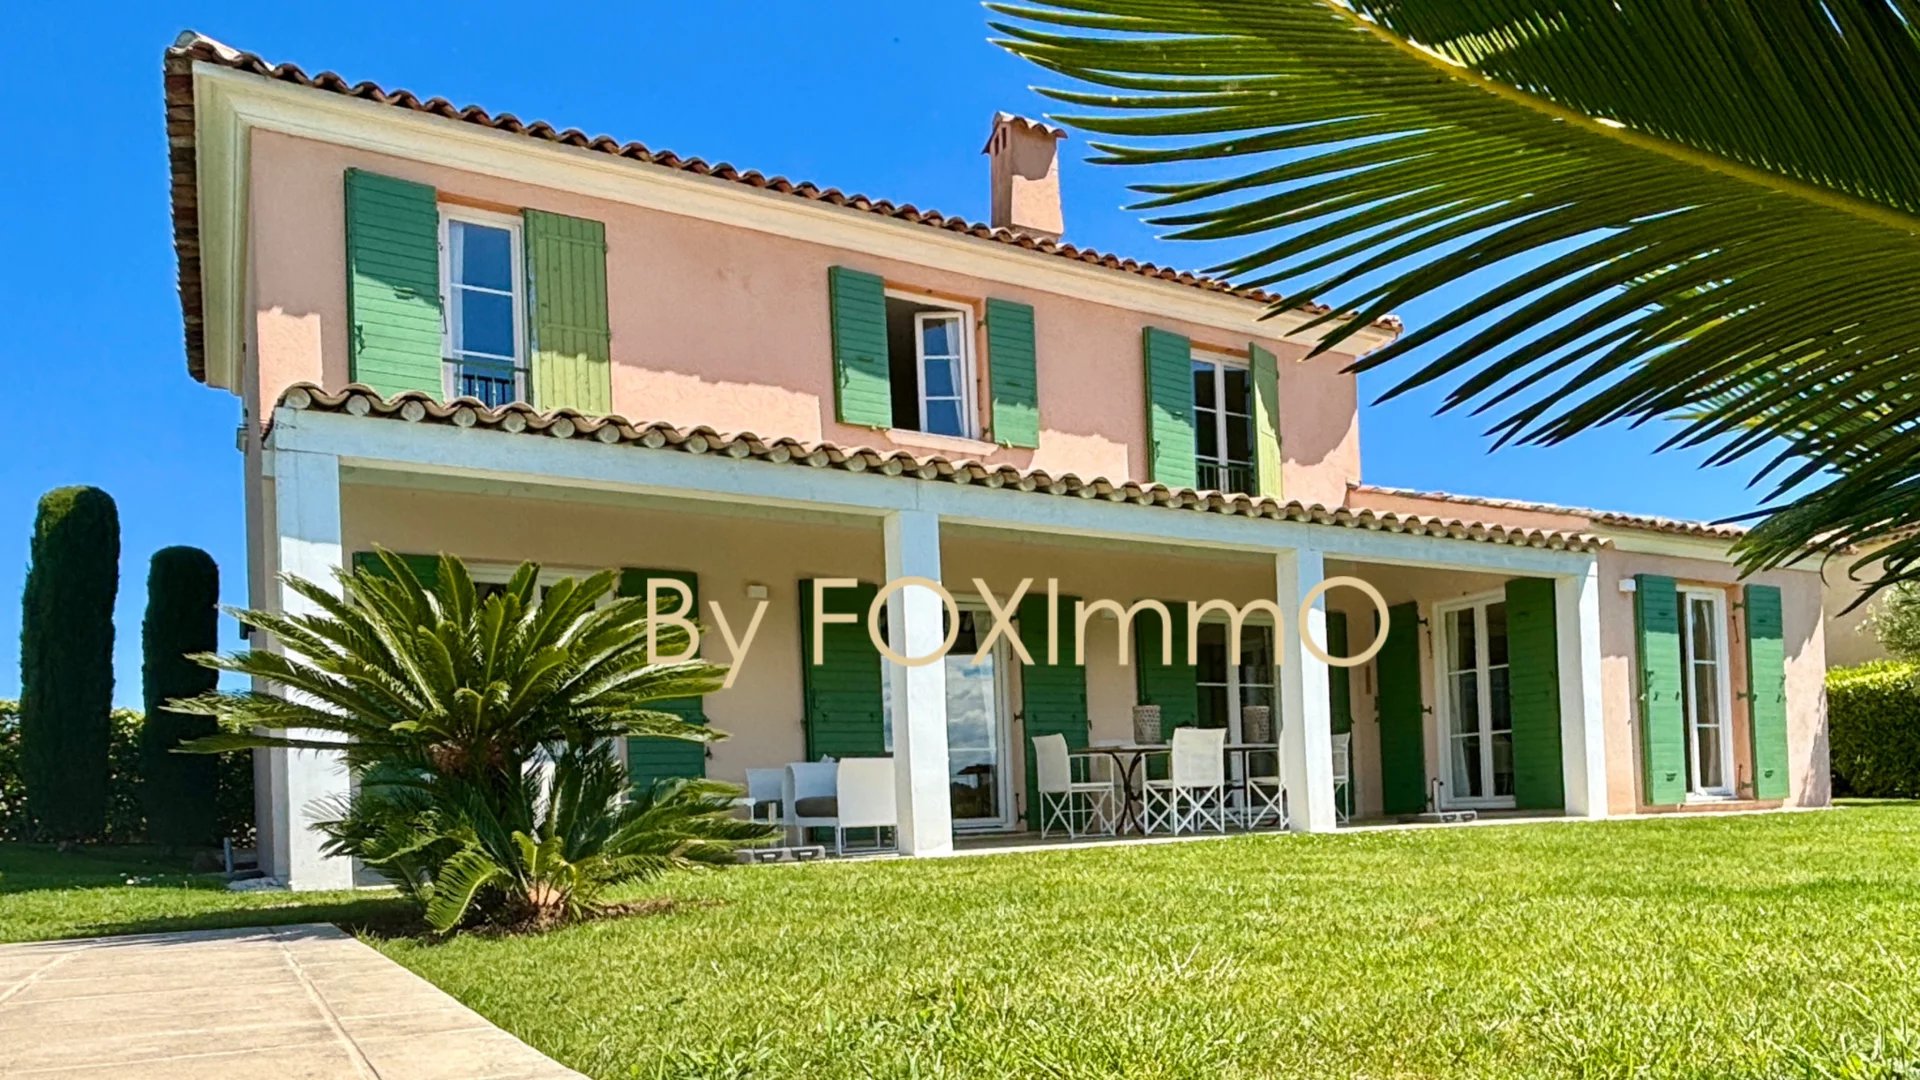 Villeneuve near Biot, Vaugrenier, in a sought-after, secure estate with low charges.